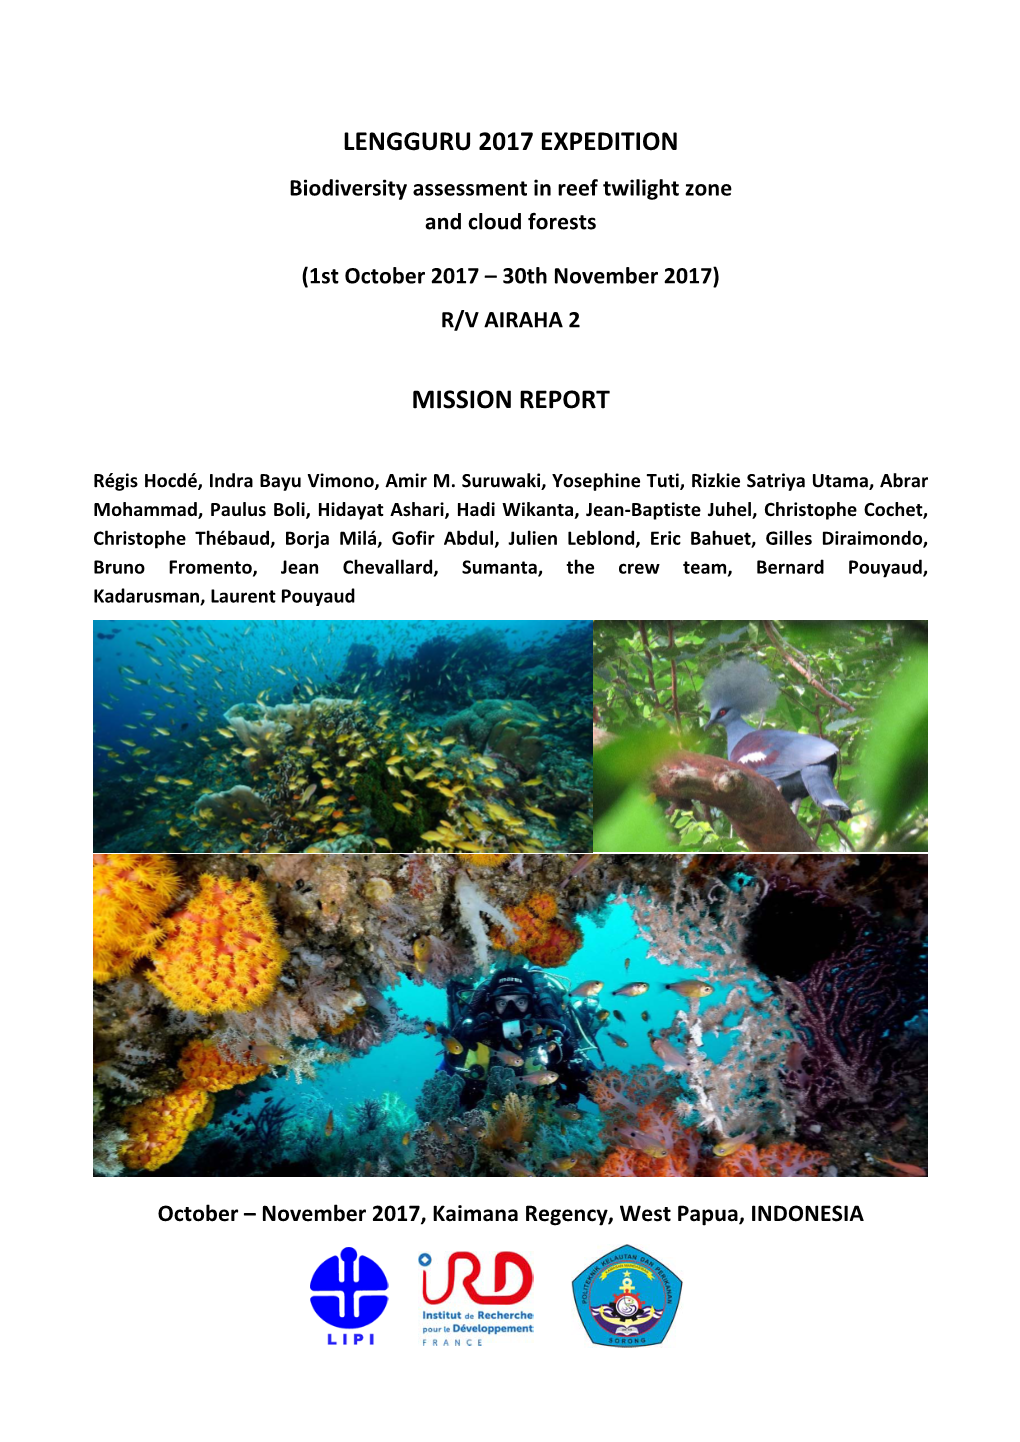 LENGGURU 2017 EXPEDITION Biodiversity Assessment in Reef Twilight Zone and Cloud Forests